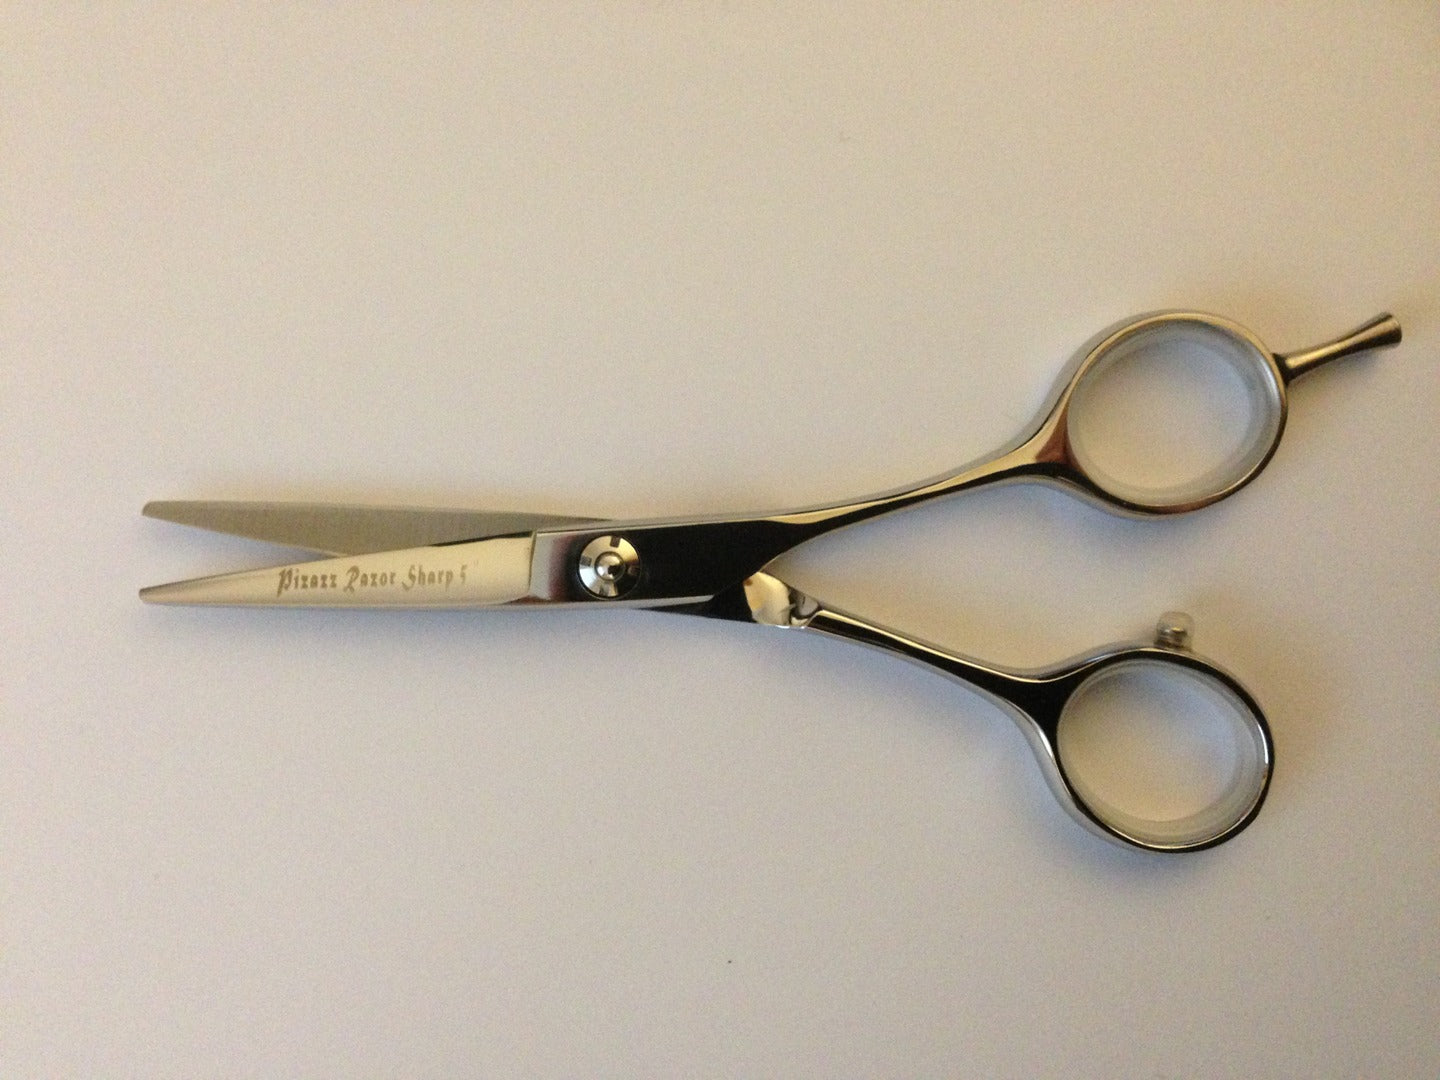 Pizazz Razor Sharp: Available in sizes 5", 5.5", 6" and 6.5"